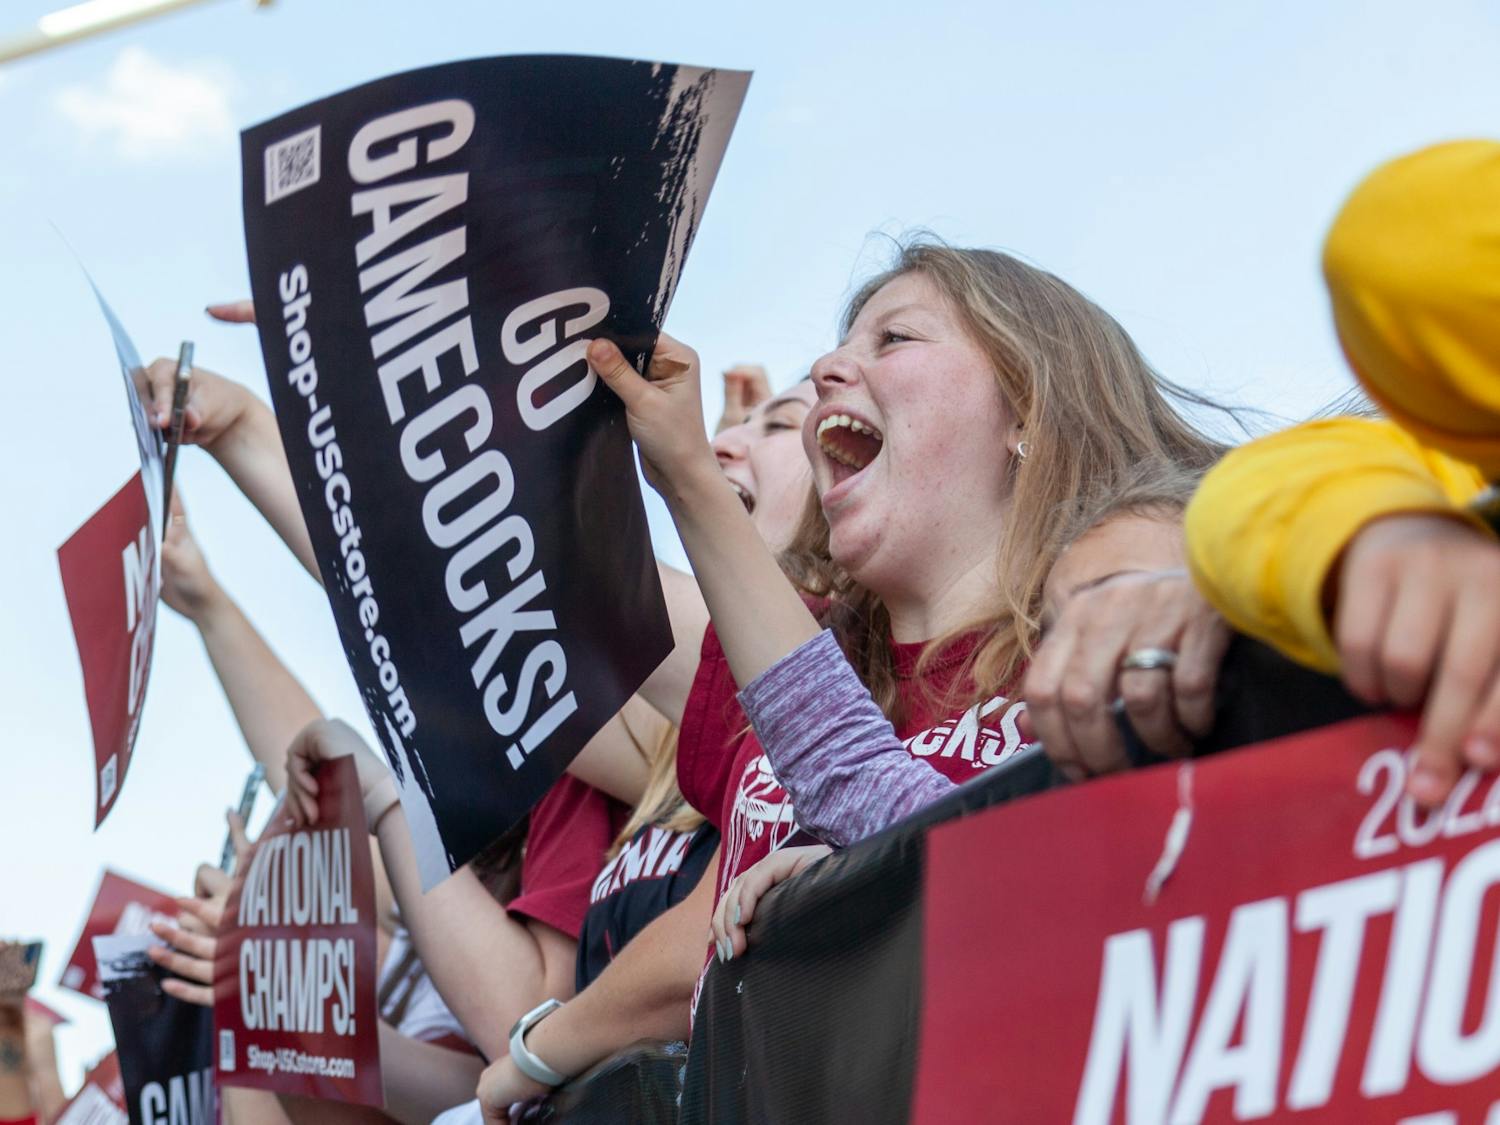 South Carolina fans wave signs at Colonial Life Arena in Columbia, SC on April 4, 2022. The outside of the arena was crowded with fans supporting the women's basketball team.